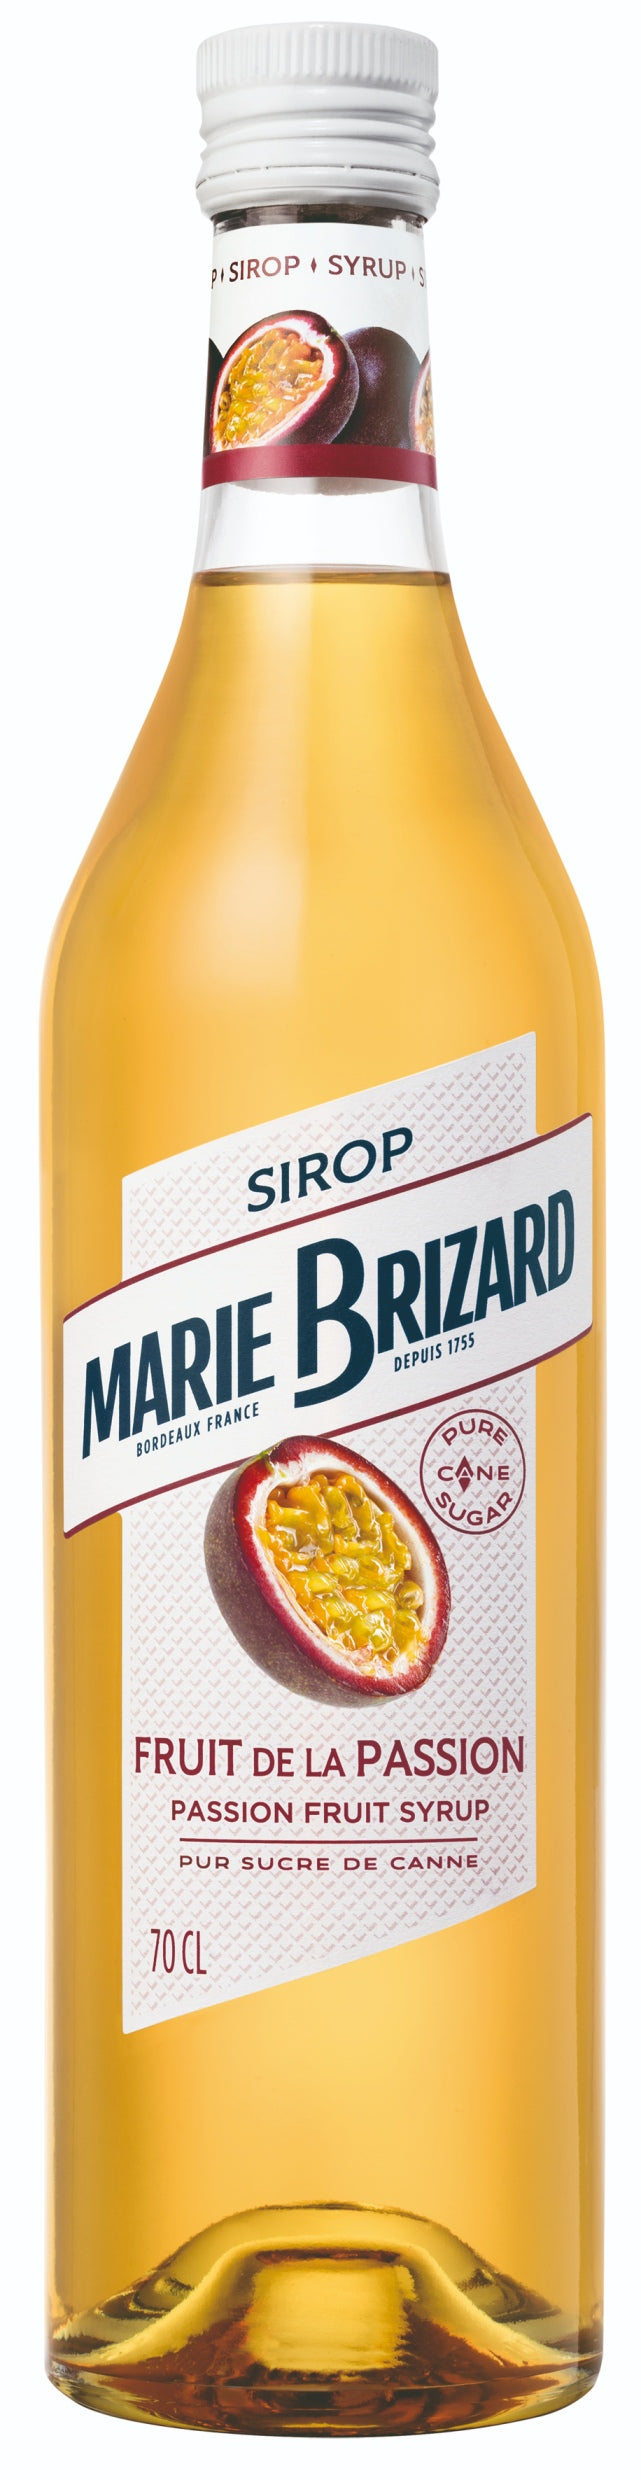 MARIE BRIZARD SIROP PASSION 70CL